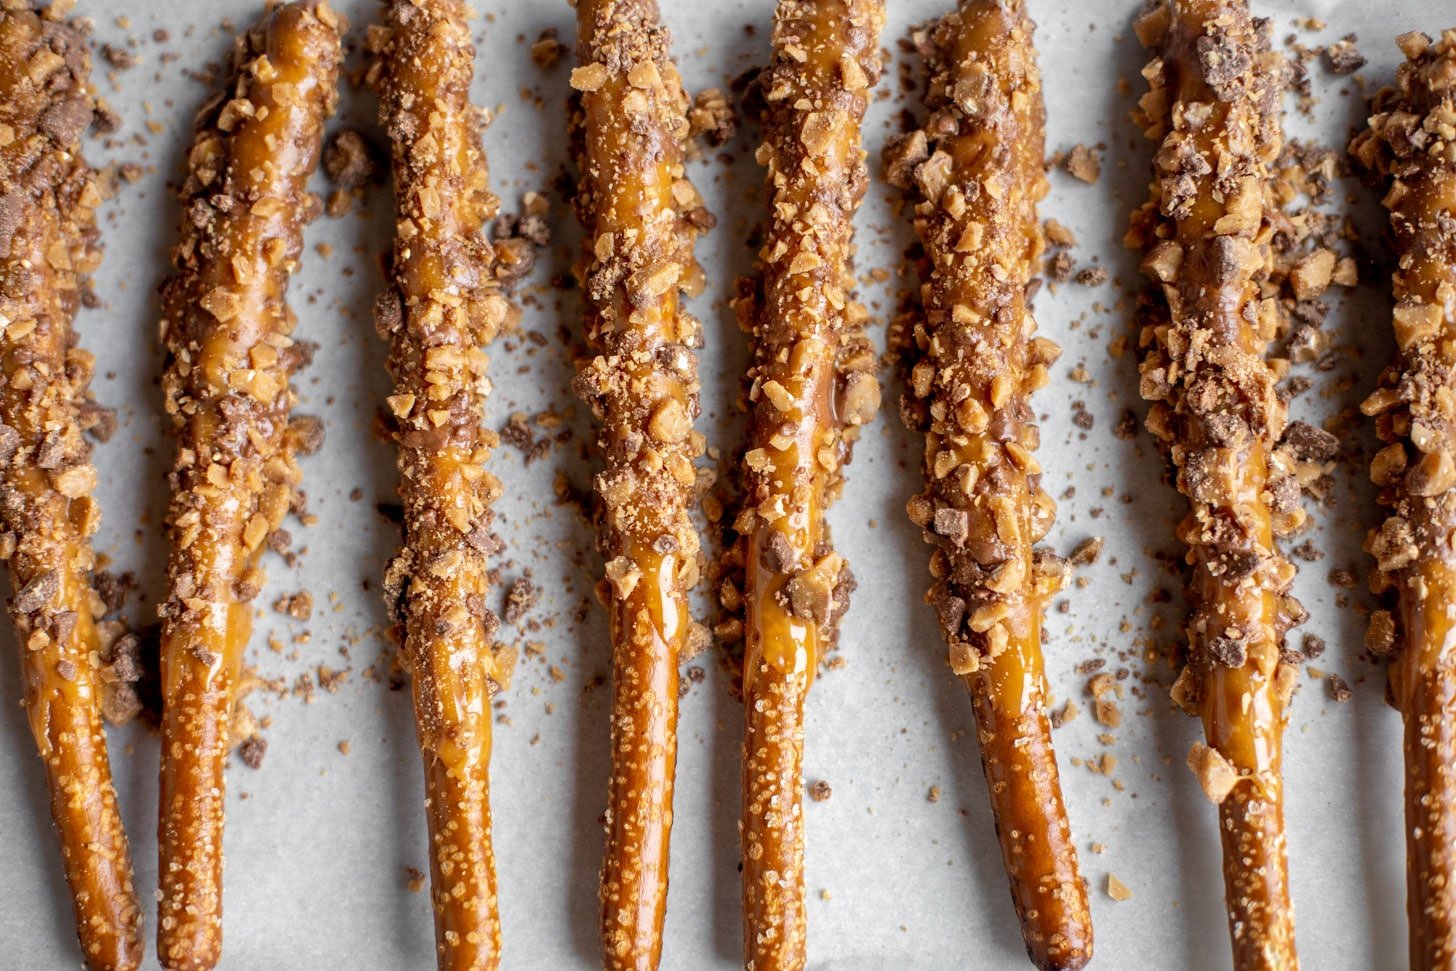 pretzels dipped in caramel and toffee